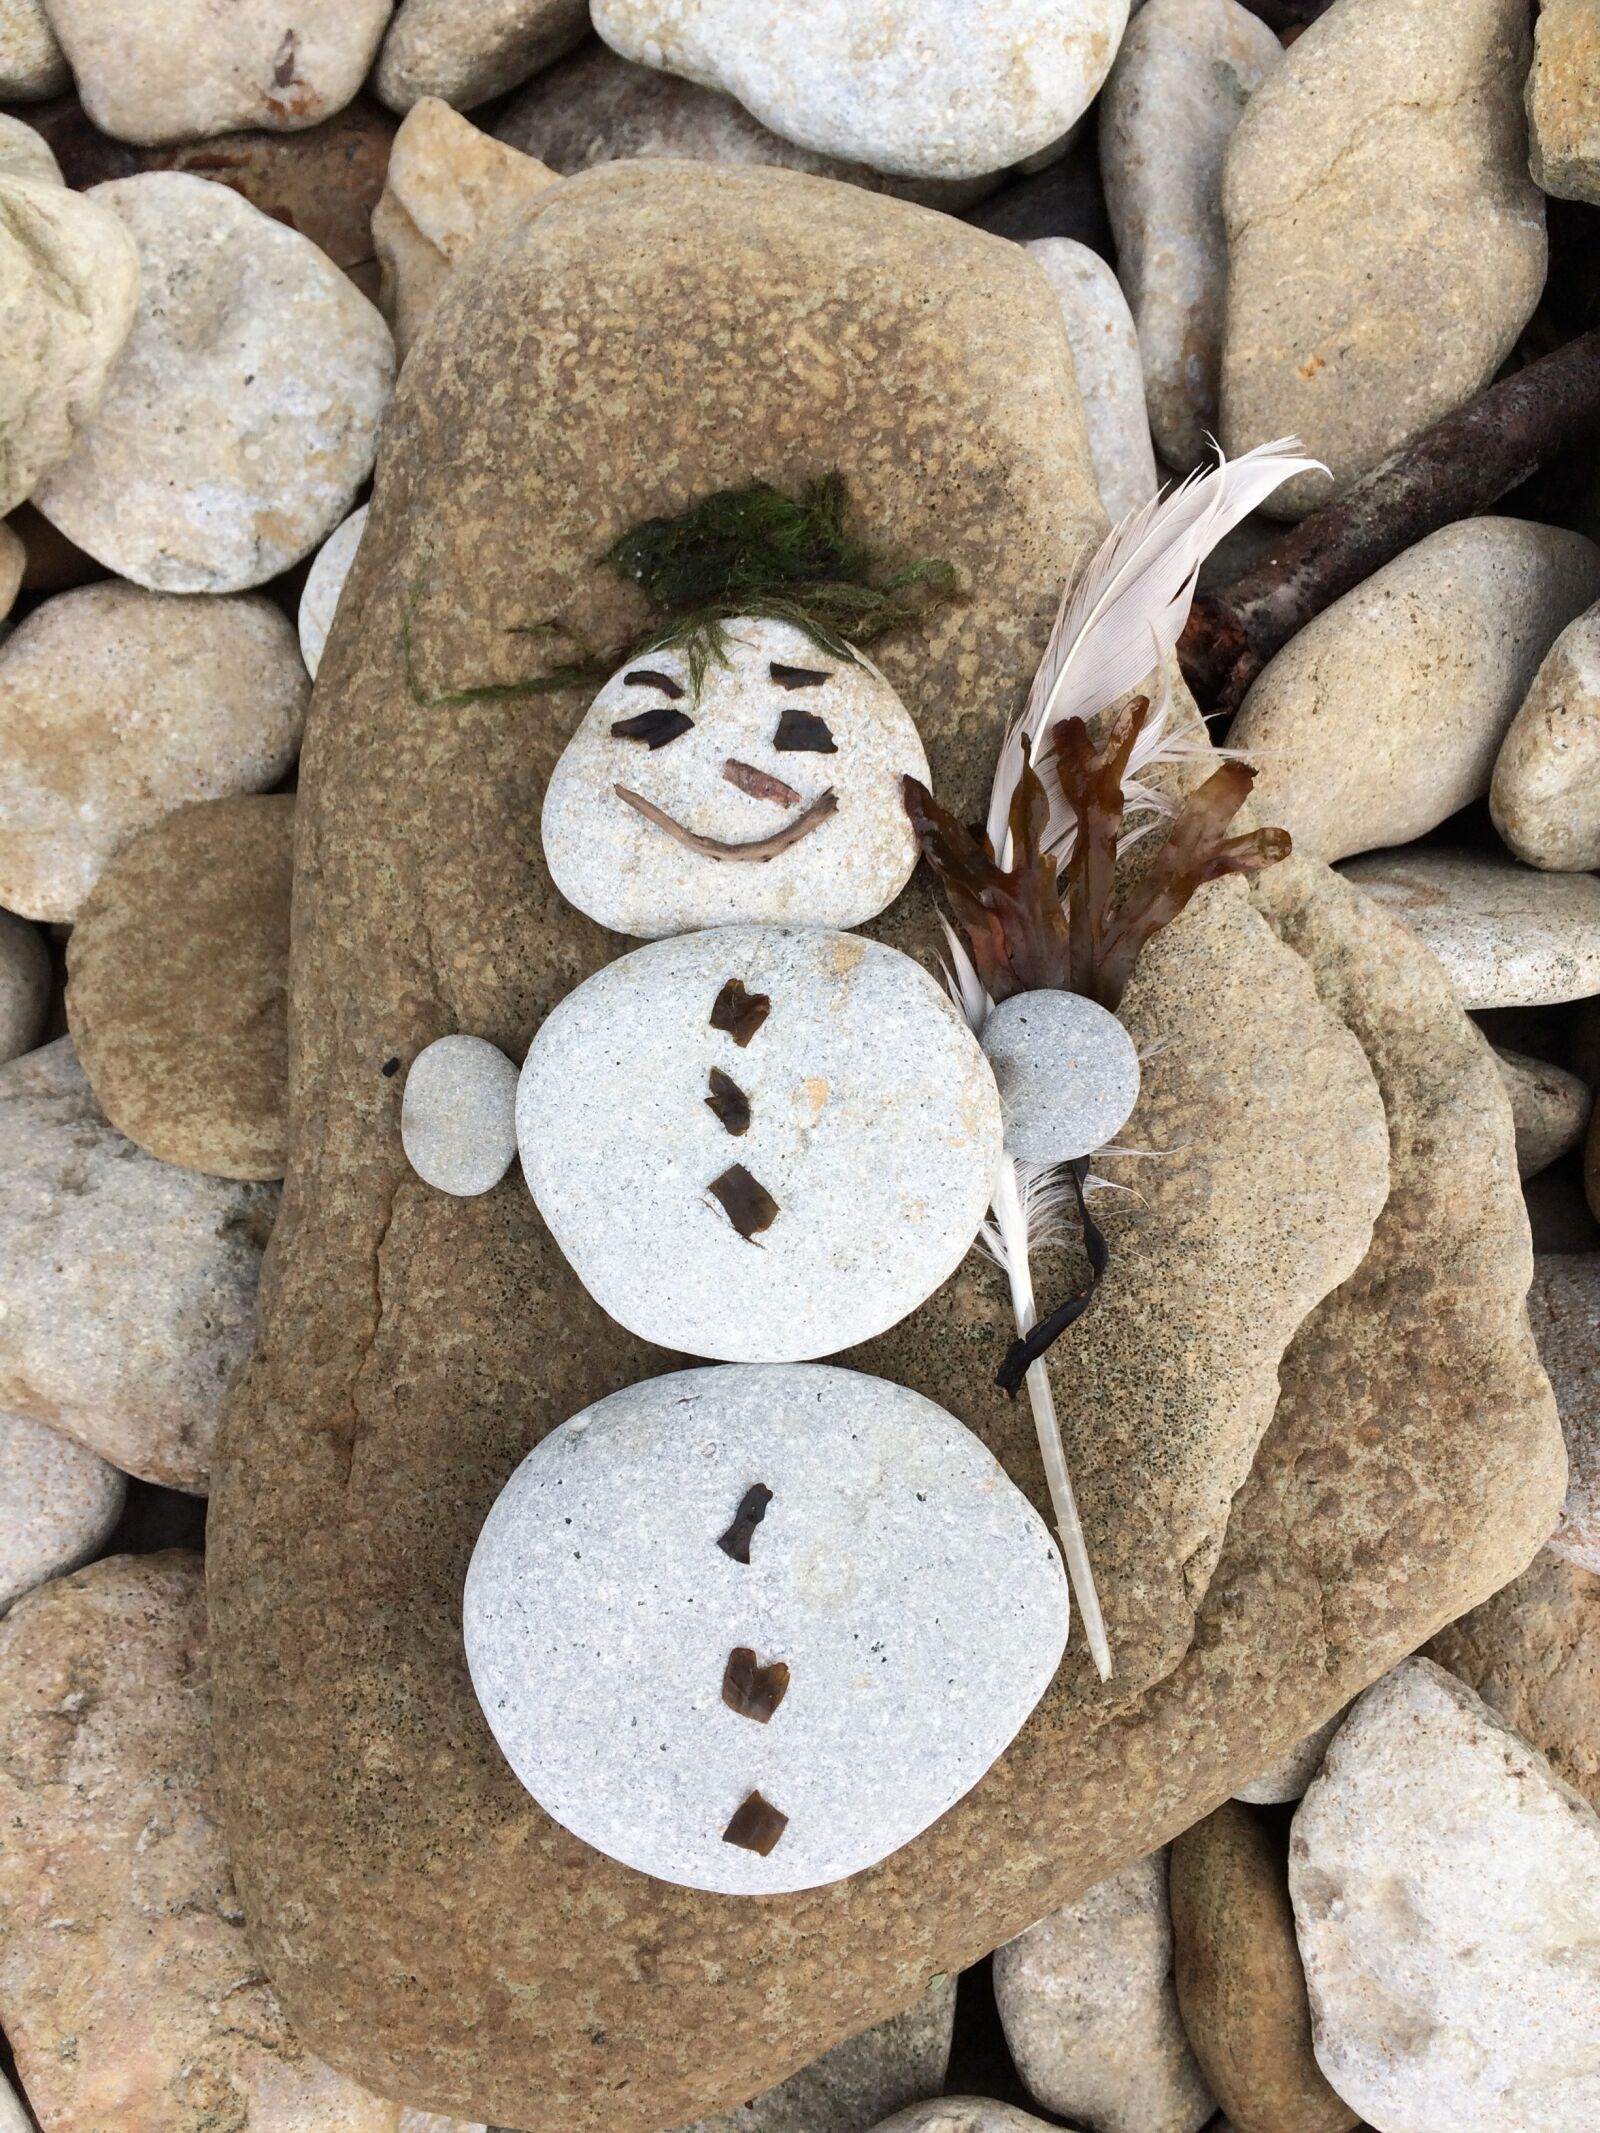 iPhone 5s back camera 4.15mm f/2.2 sample photo. Stone, snowman, smiles photography